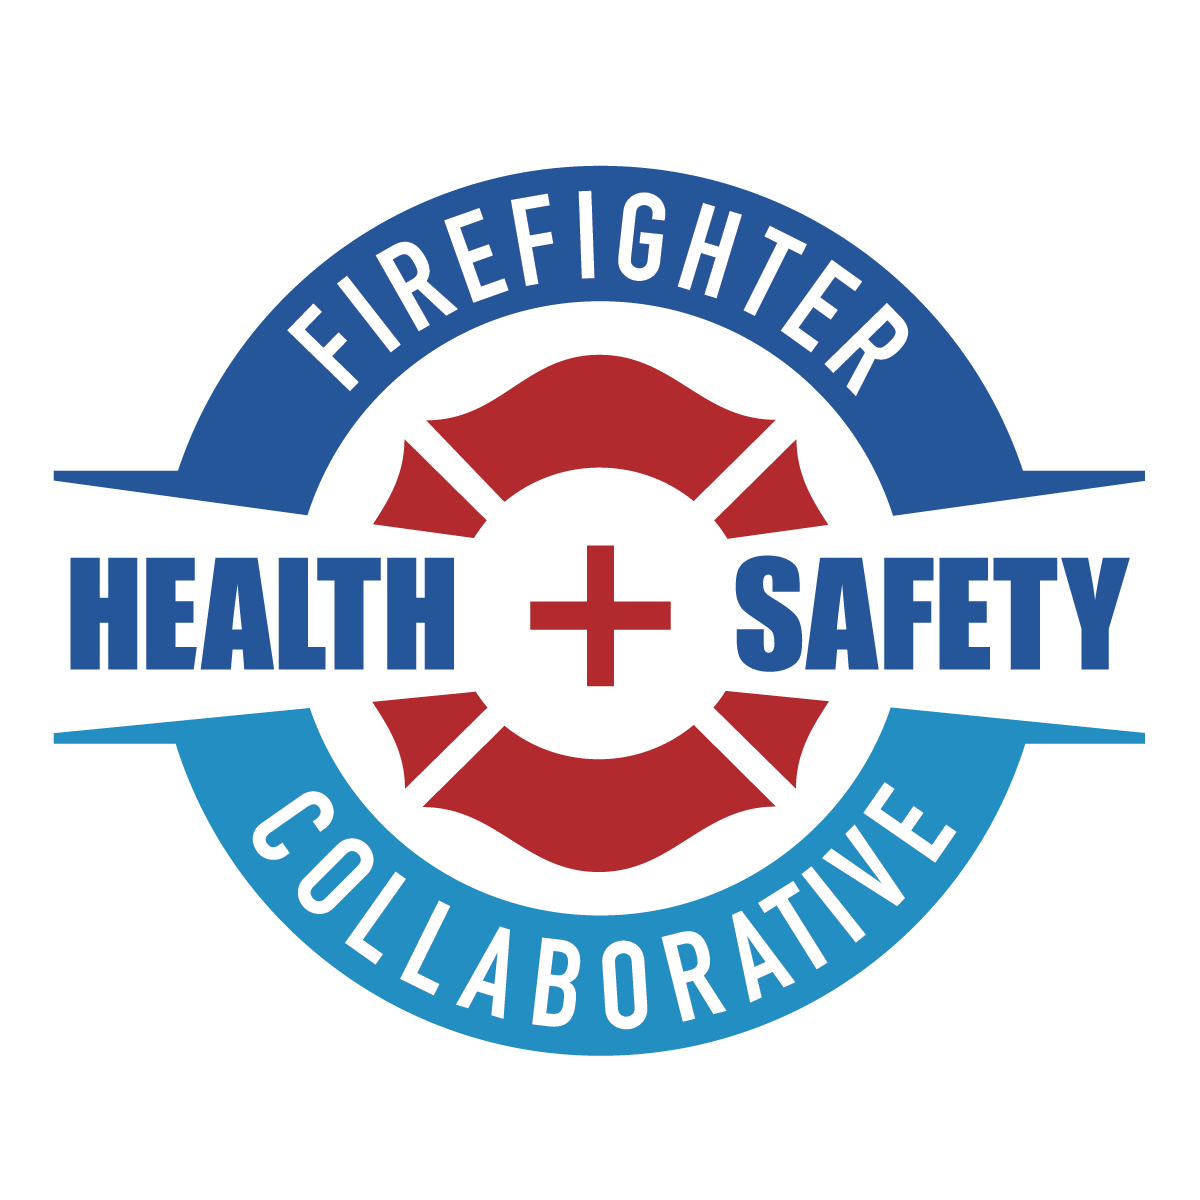 Firefighter Injury and Illness Reduction Pilot Program Will Launch in  May